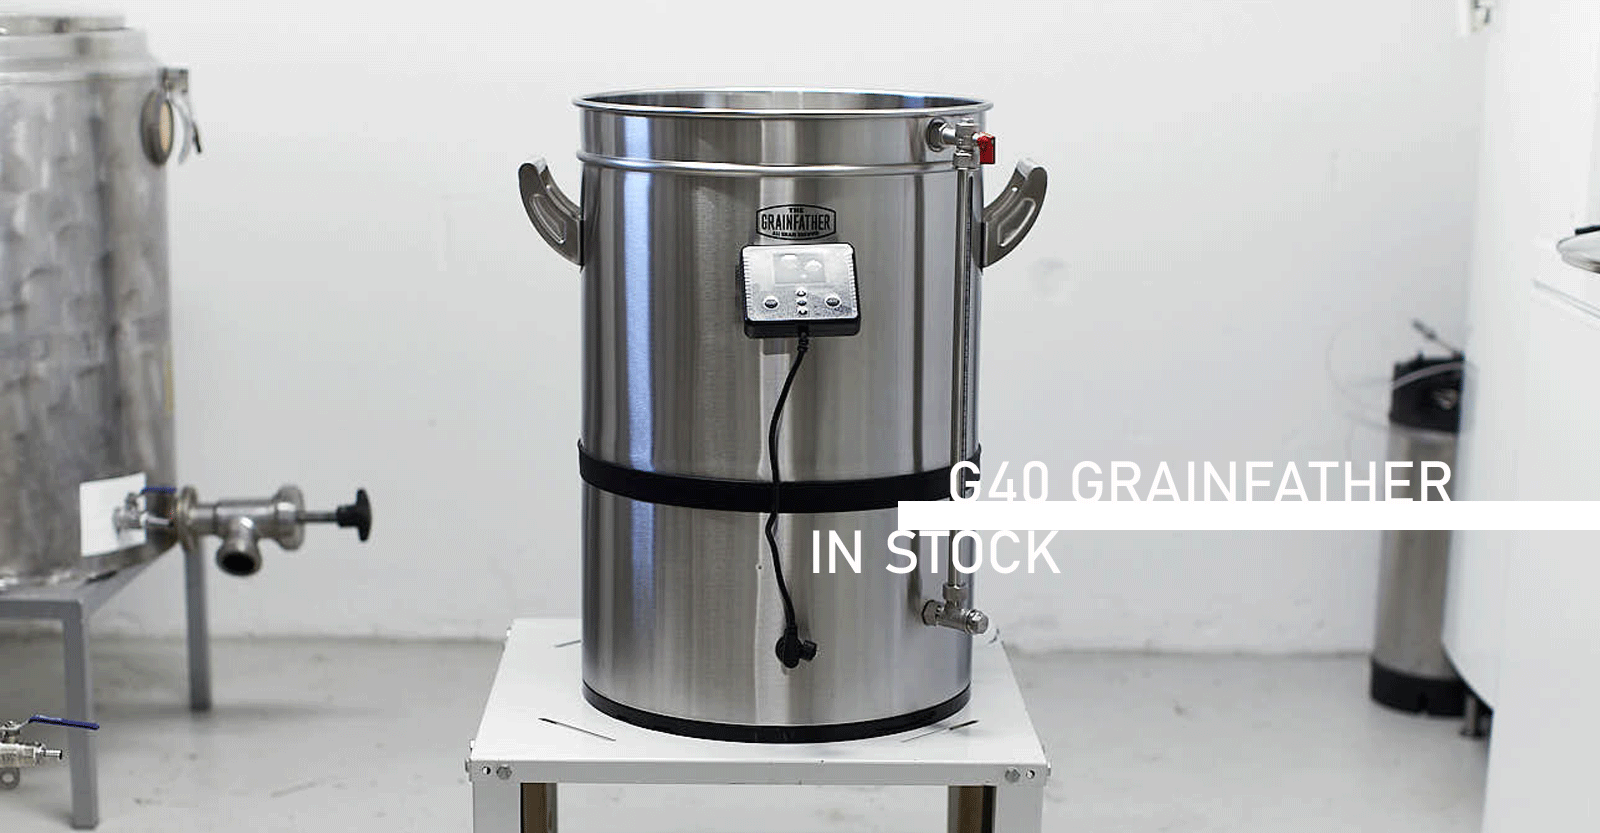 G40 Grainfather back in stock